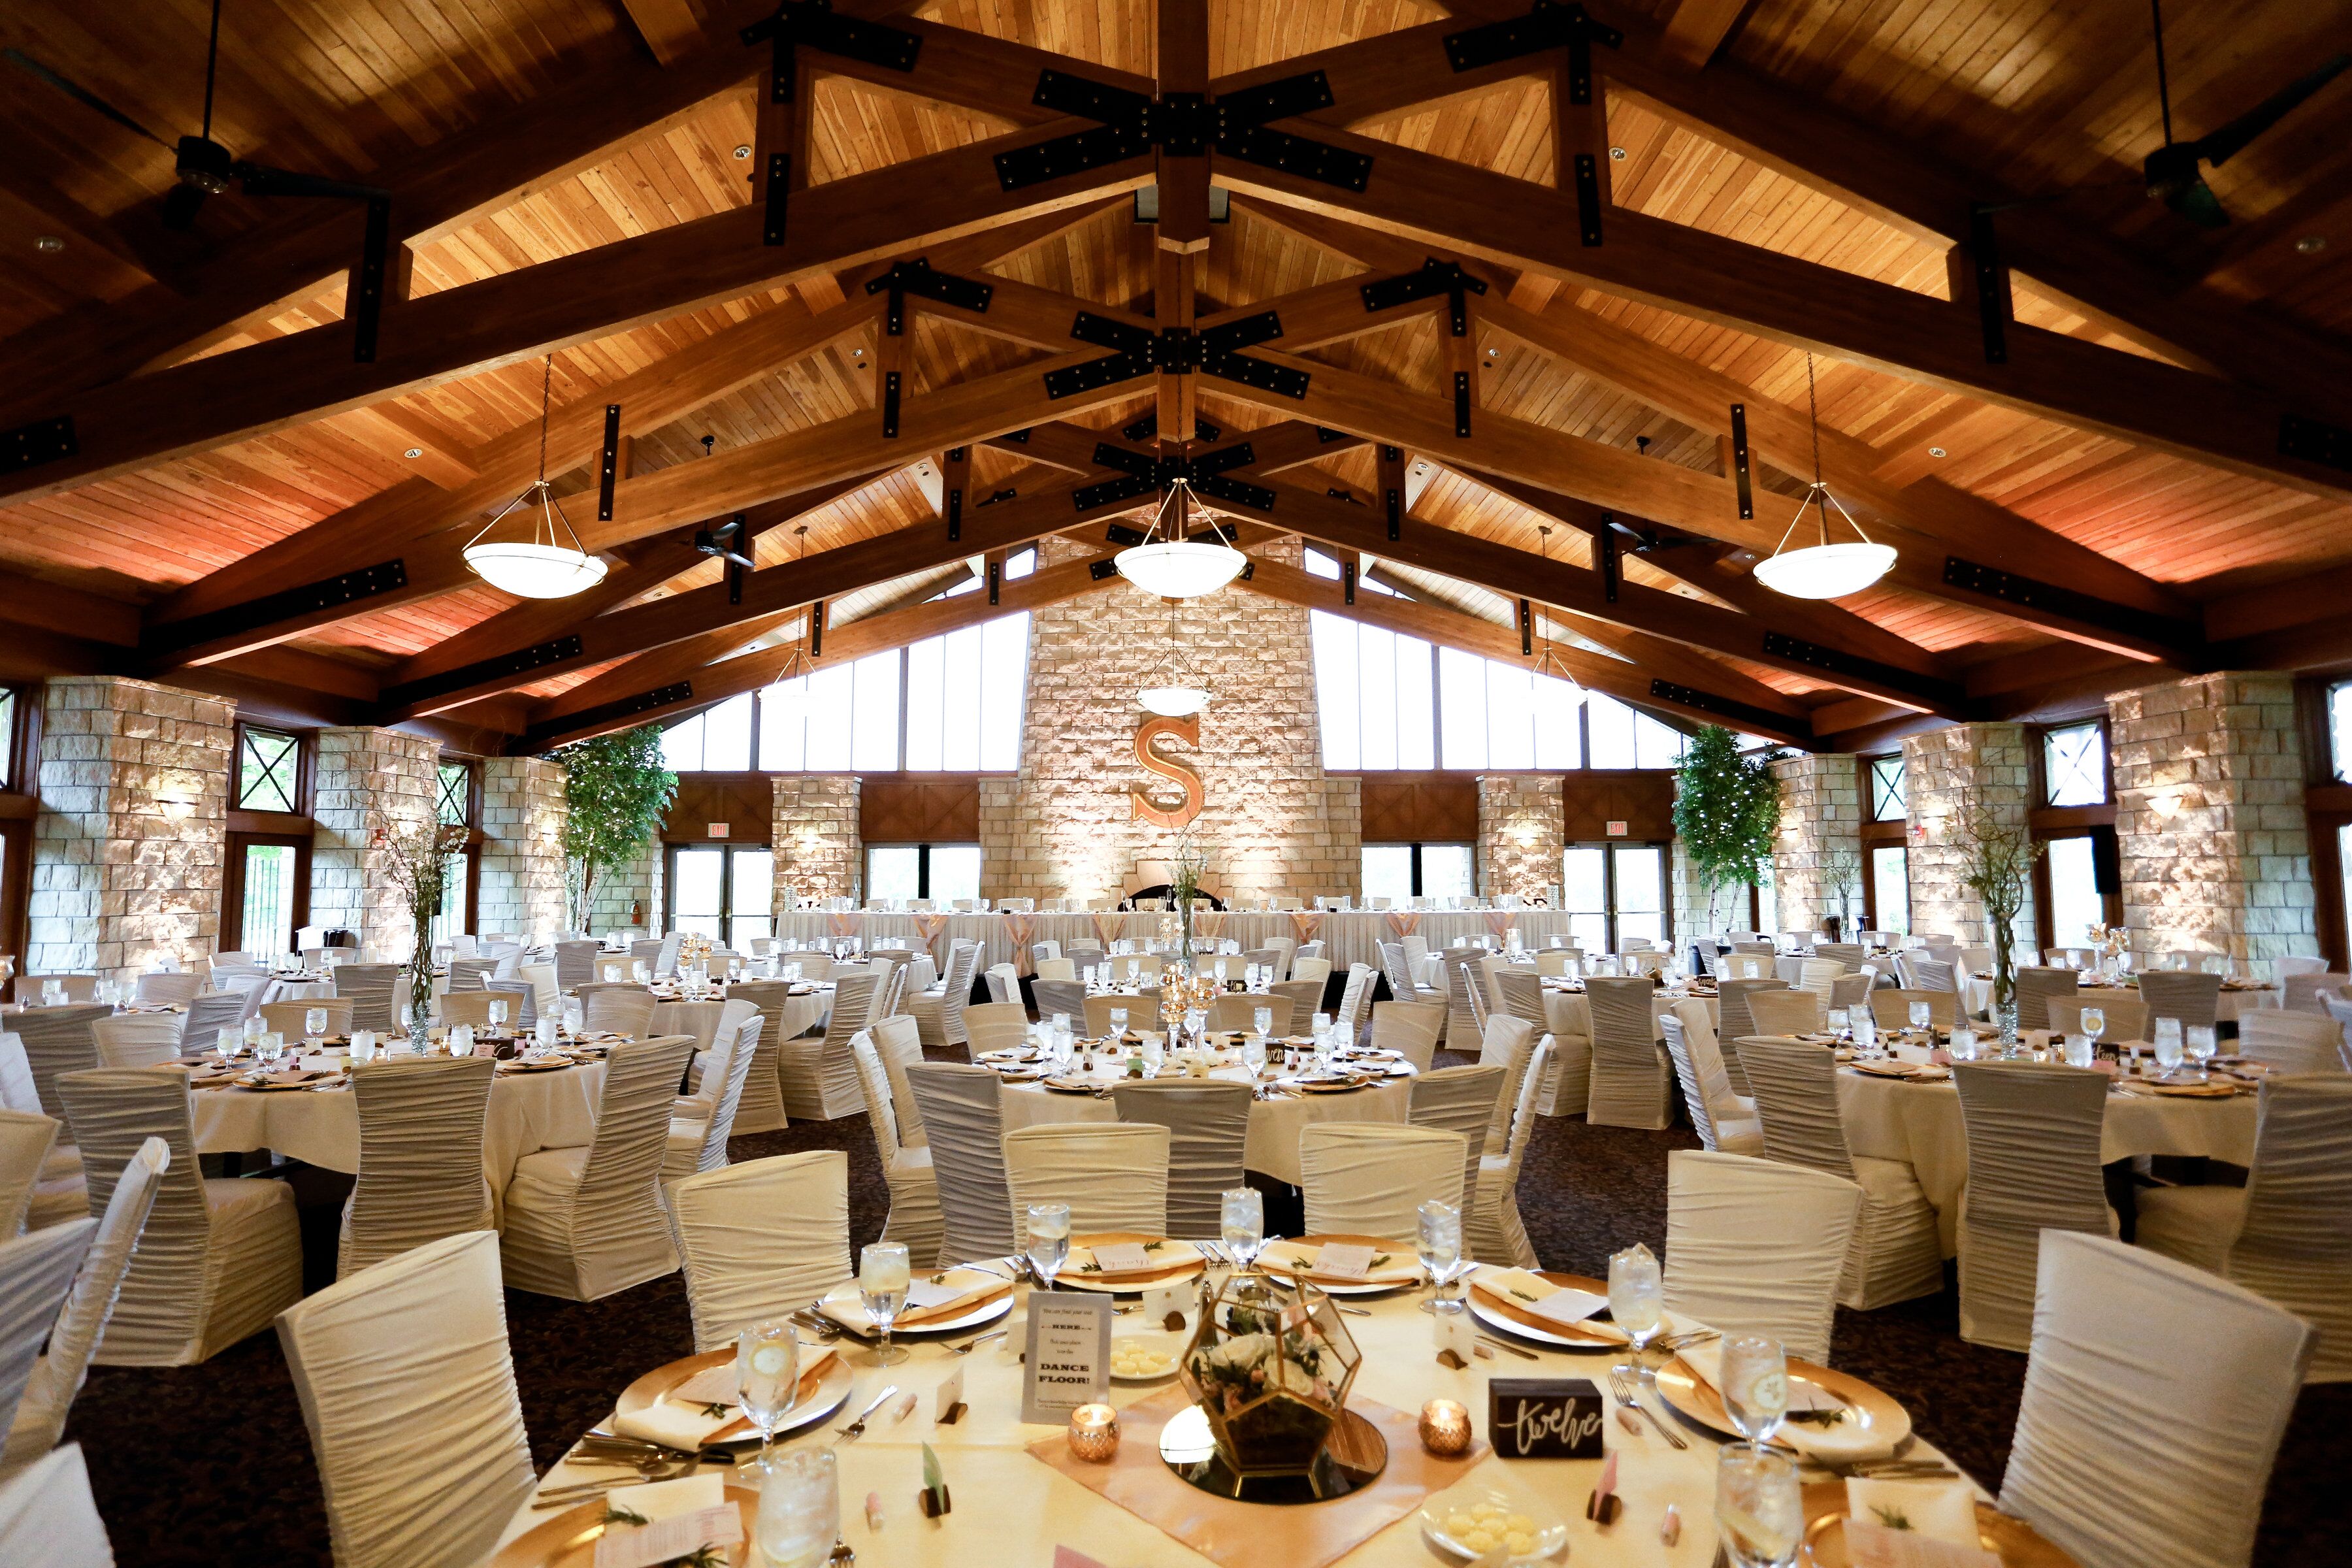 Top Wedding Reception Venues St Cloud Mn in the world The ultimate guide 